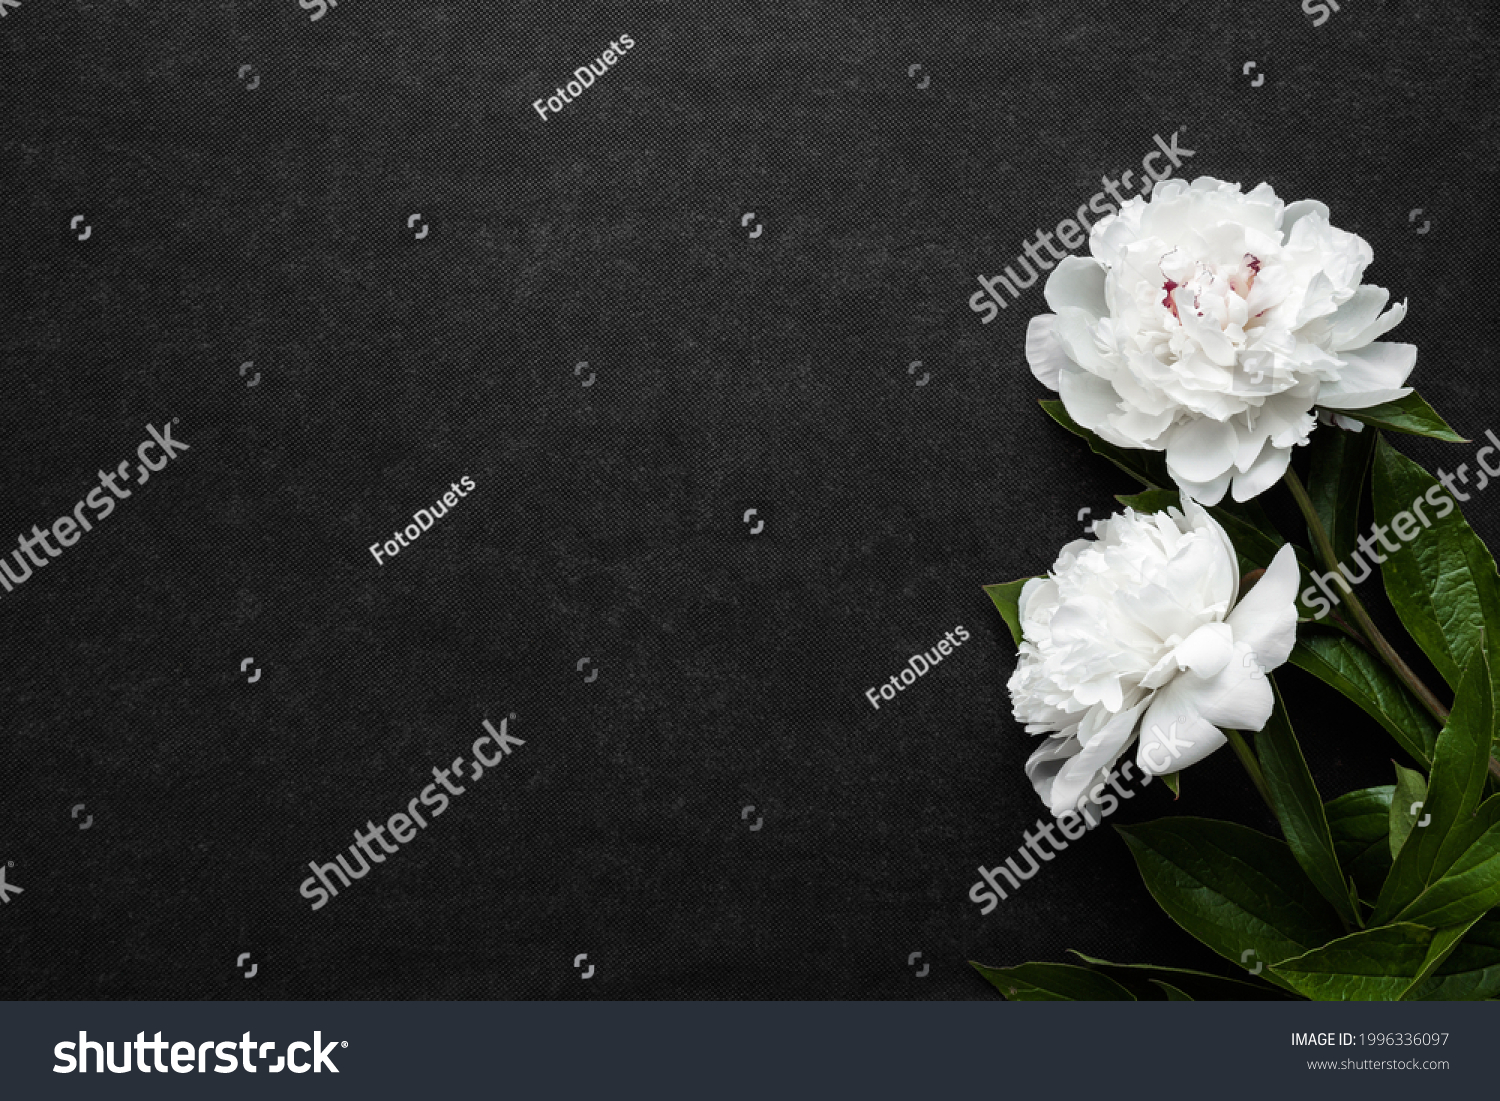 Two fresh white peony flowers on dark table background. Condolence card. Empty place for emotional, sentimental text, quote or sayings. Closeup. #1996336097